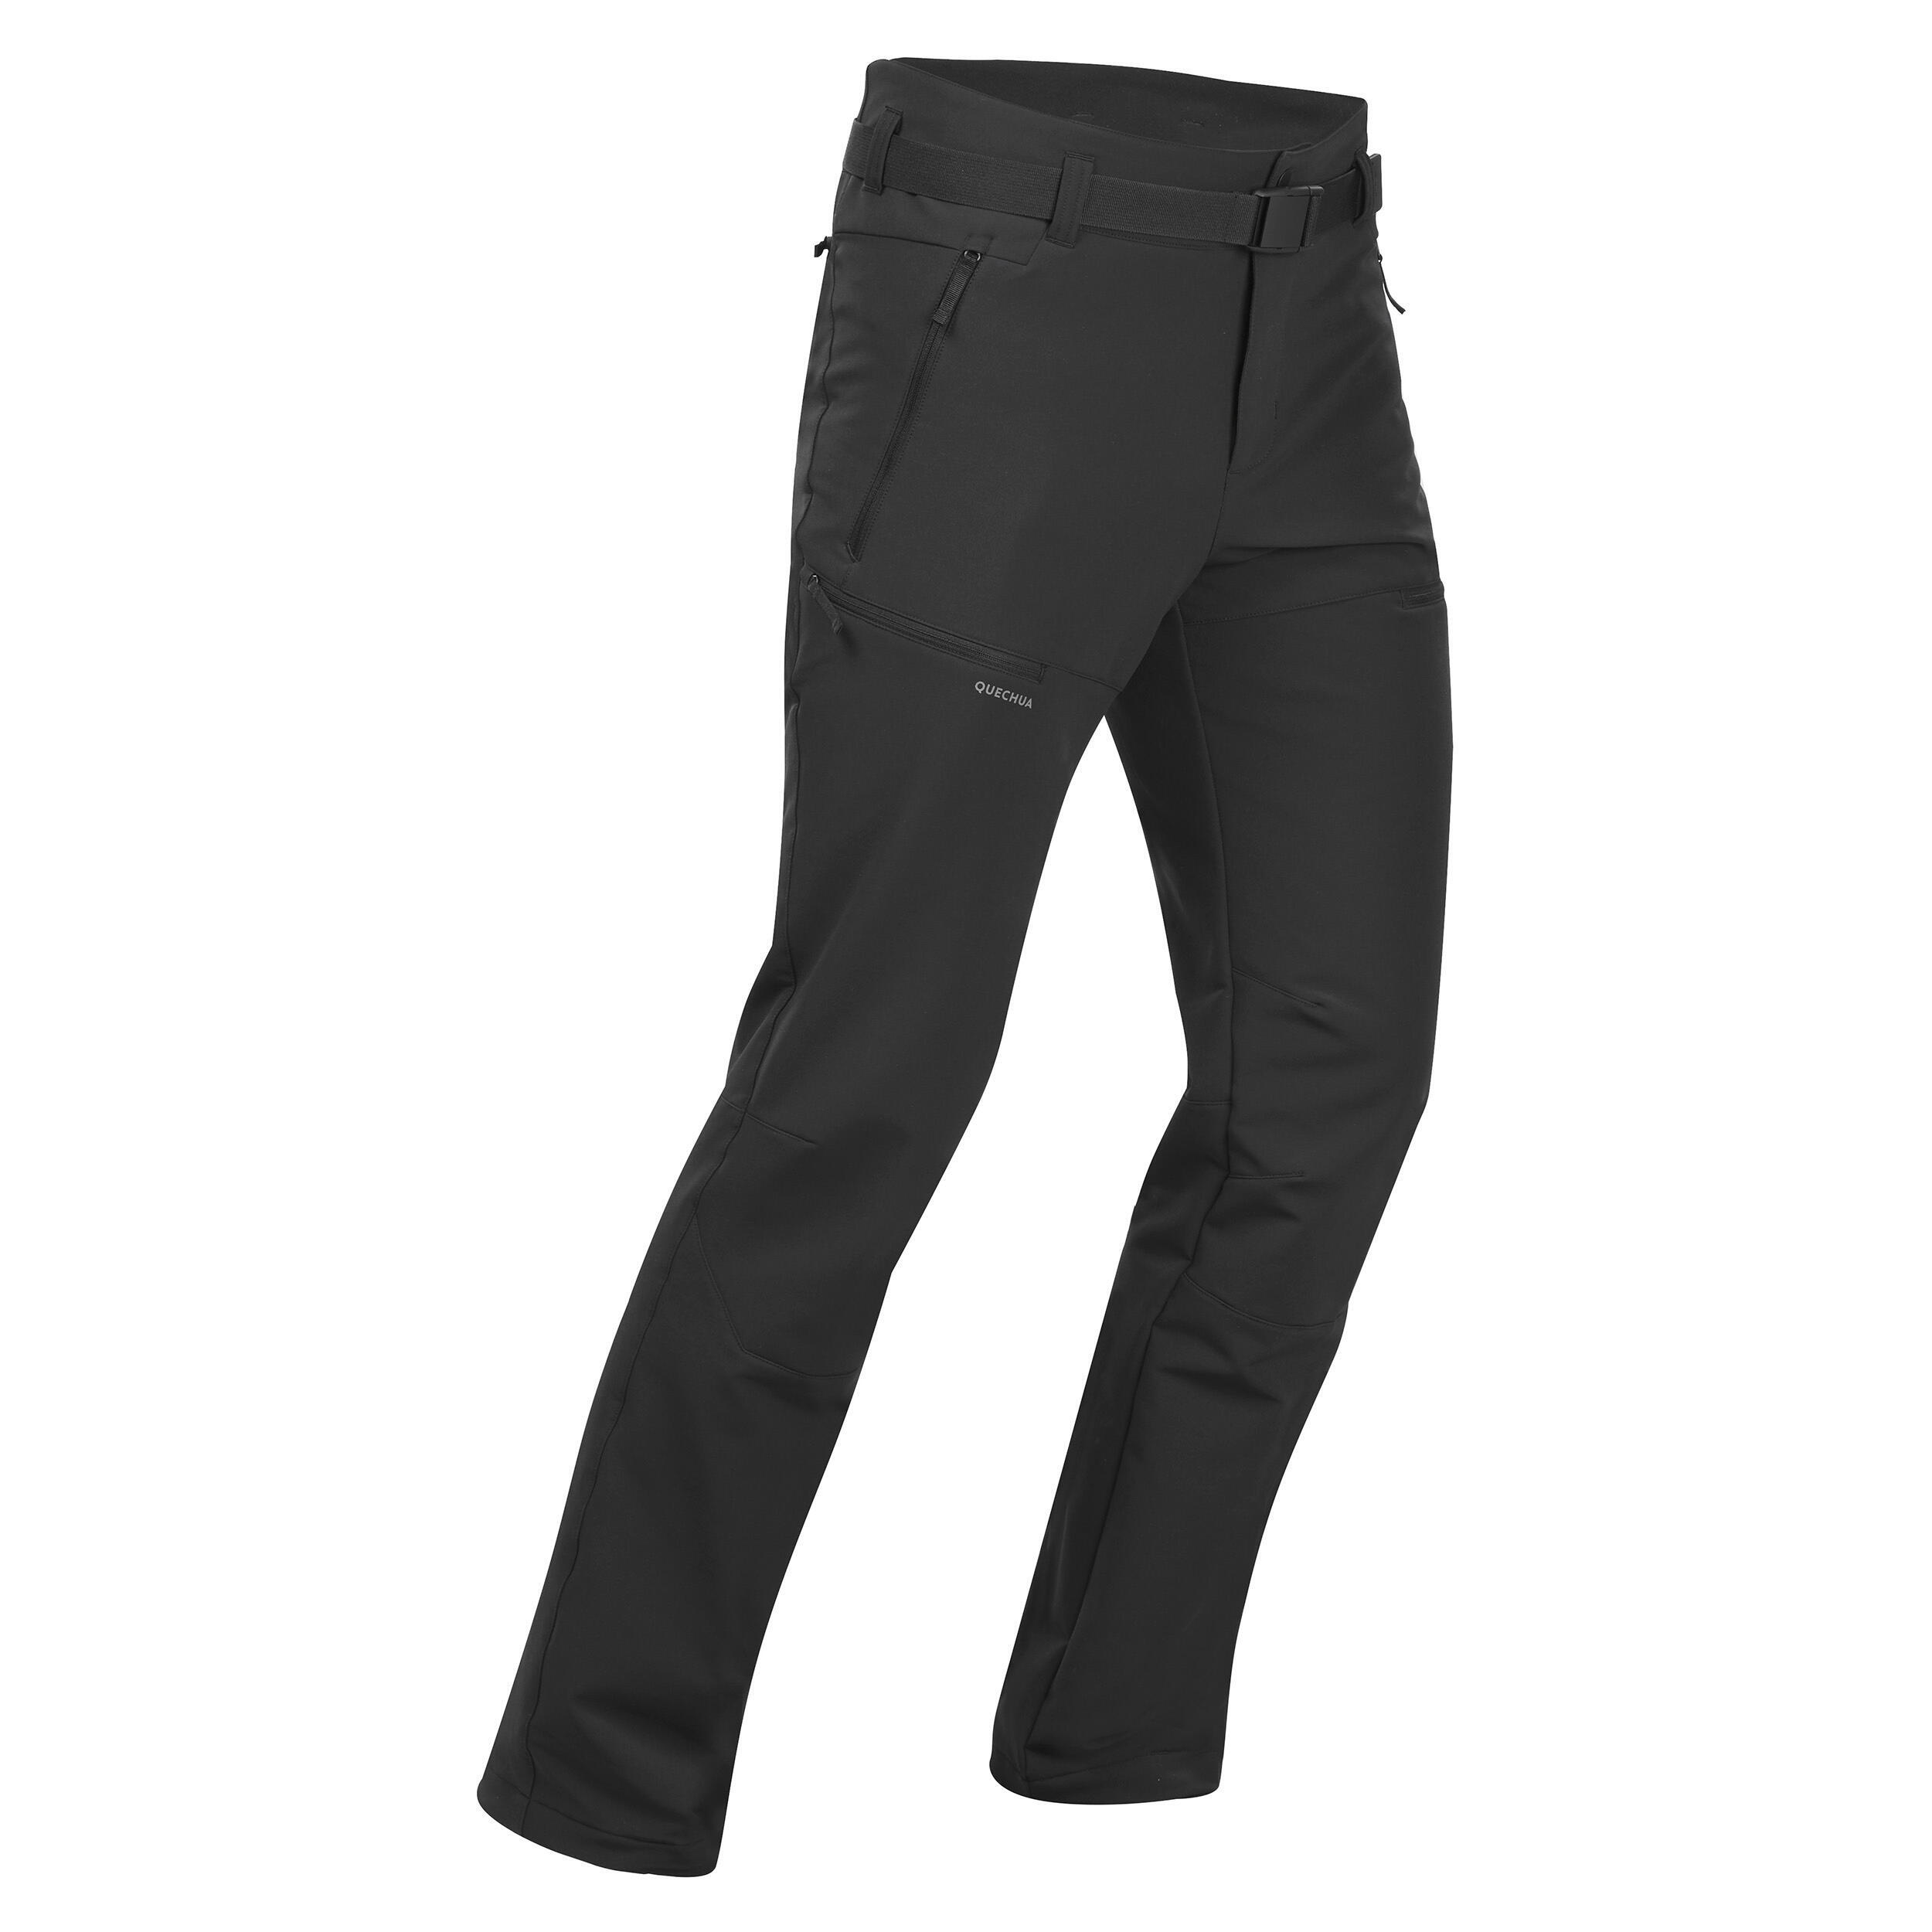 MEN'S WARM WATER-REPELLENT SNOW HIKING TROUSERS - SH500 MOUNTAIN  5/10